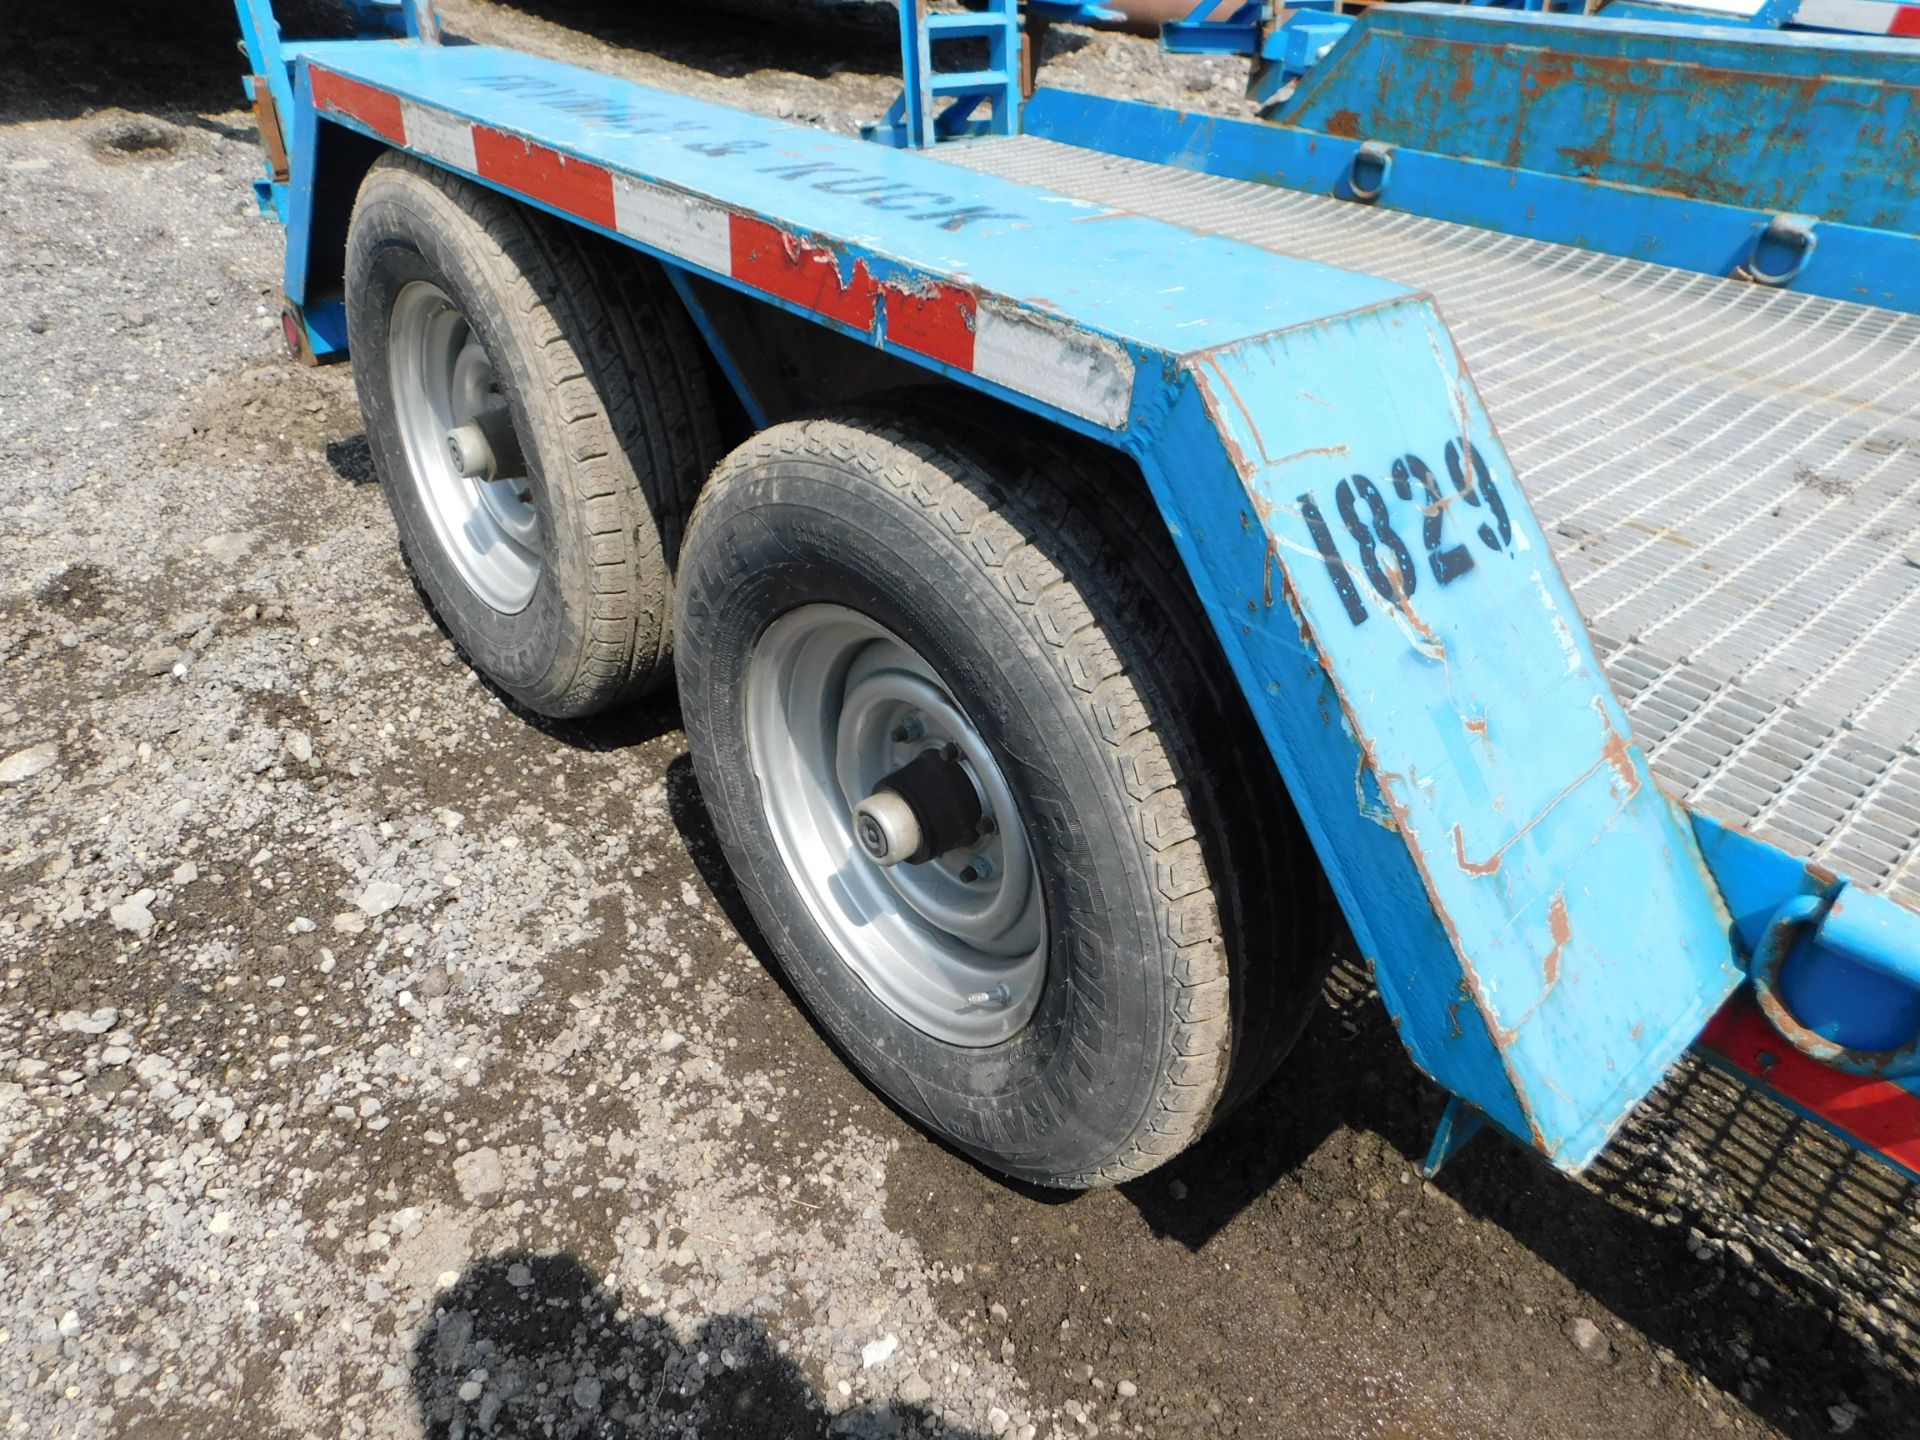 7'W x 15' Long Trailer with Grated Deck, Pintle Hitch, Ramps, Tandem Axle - Image 3 of 9